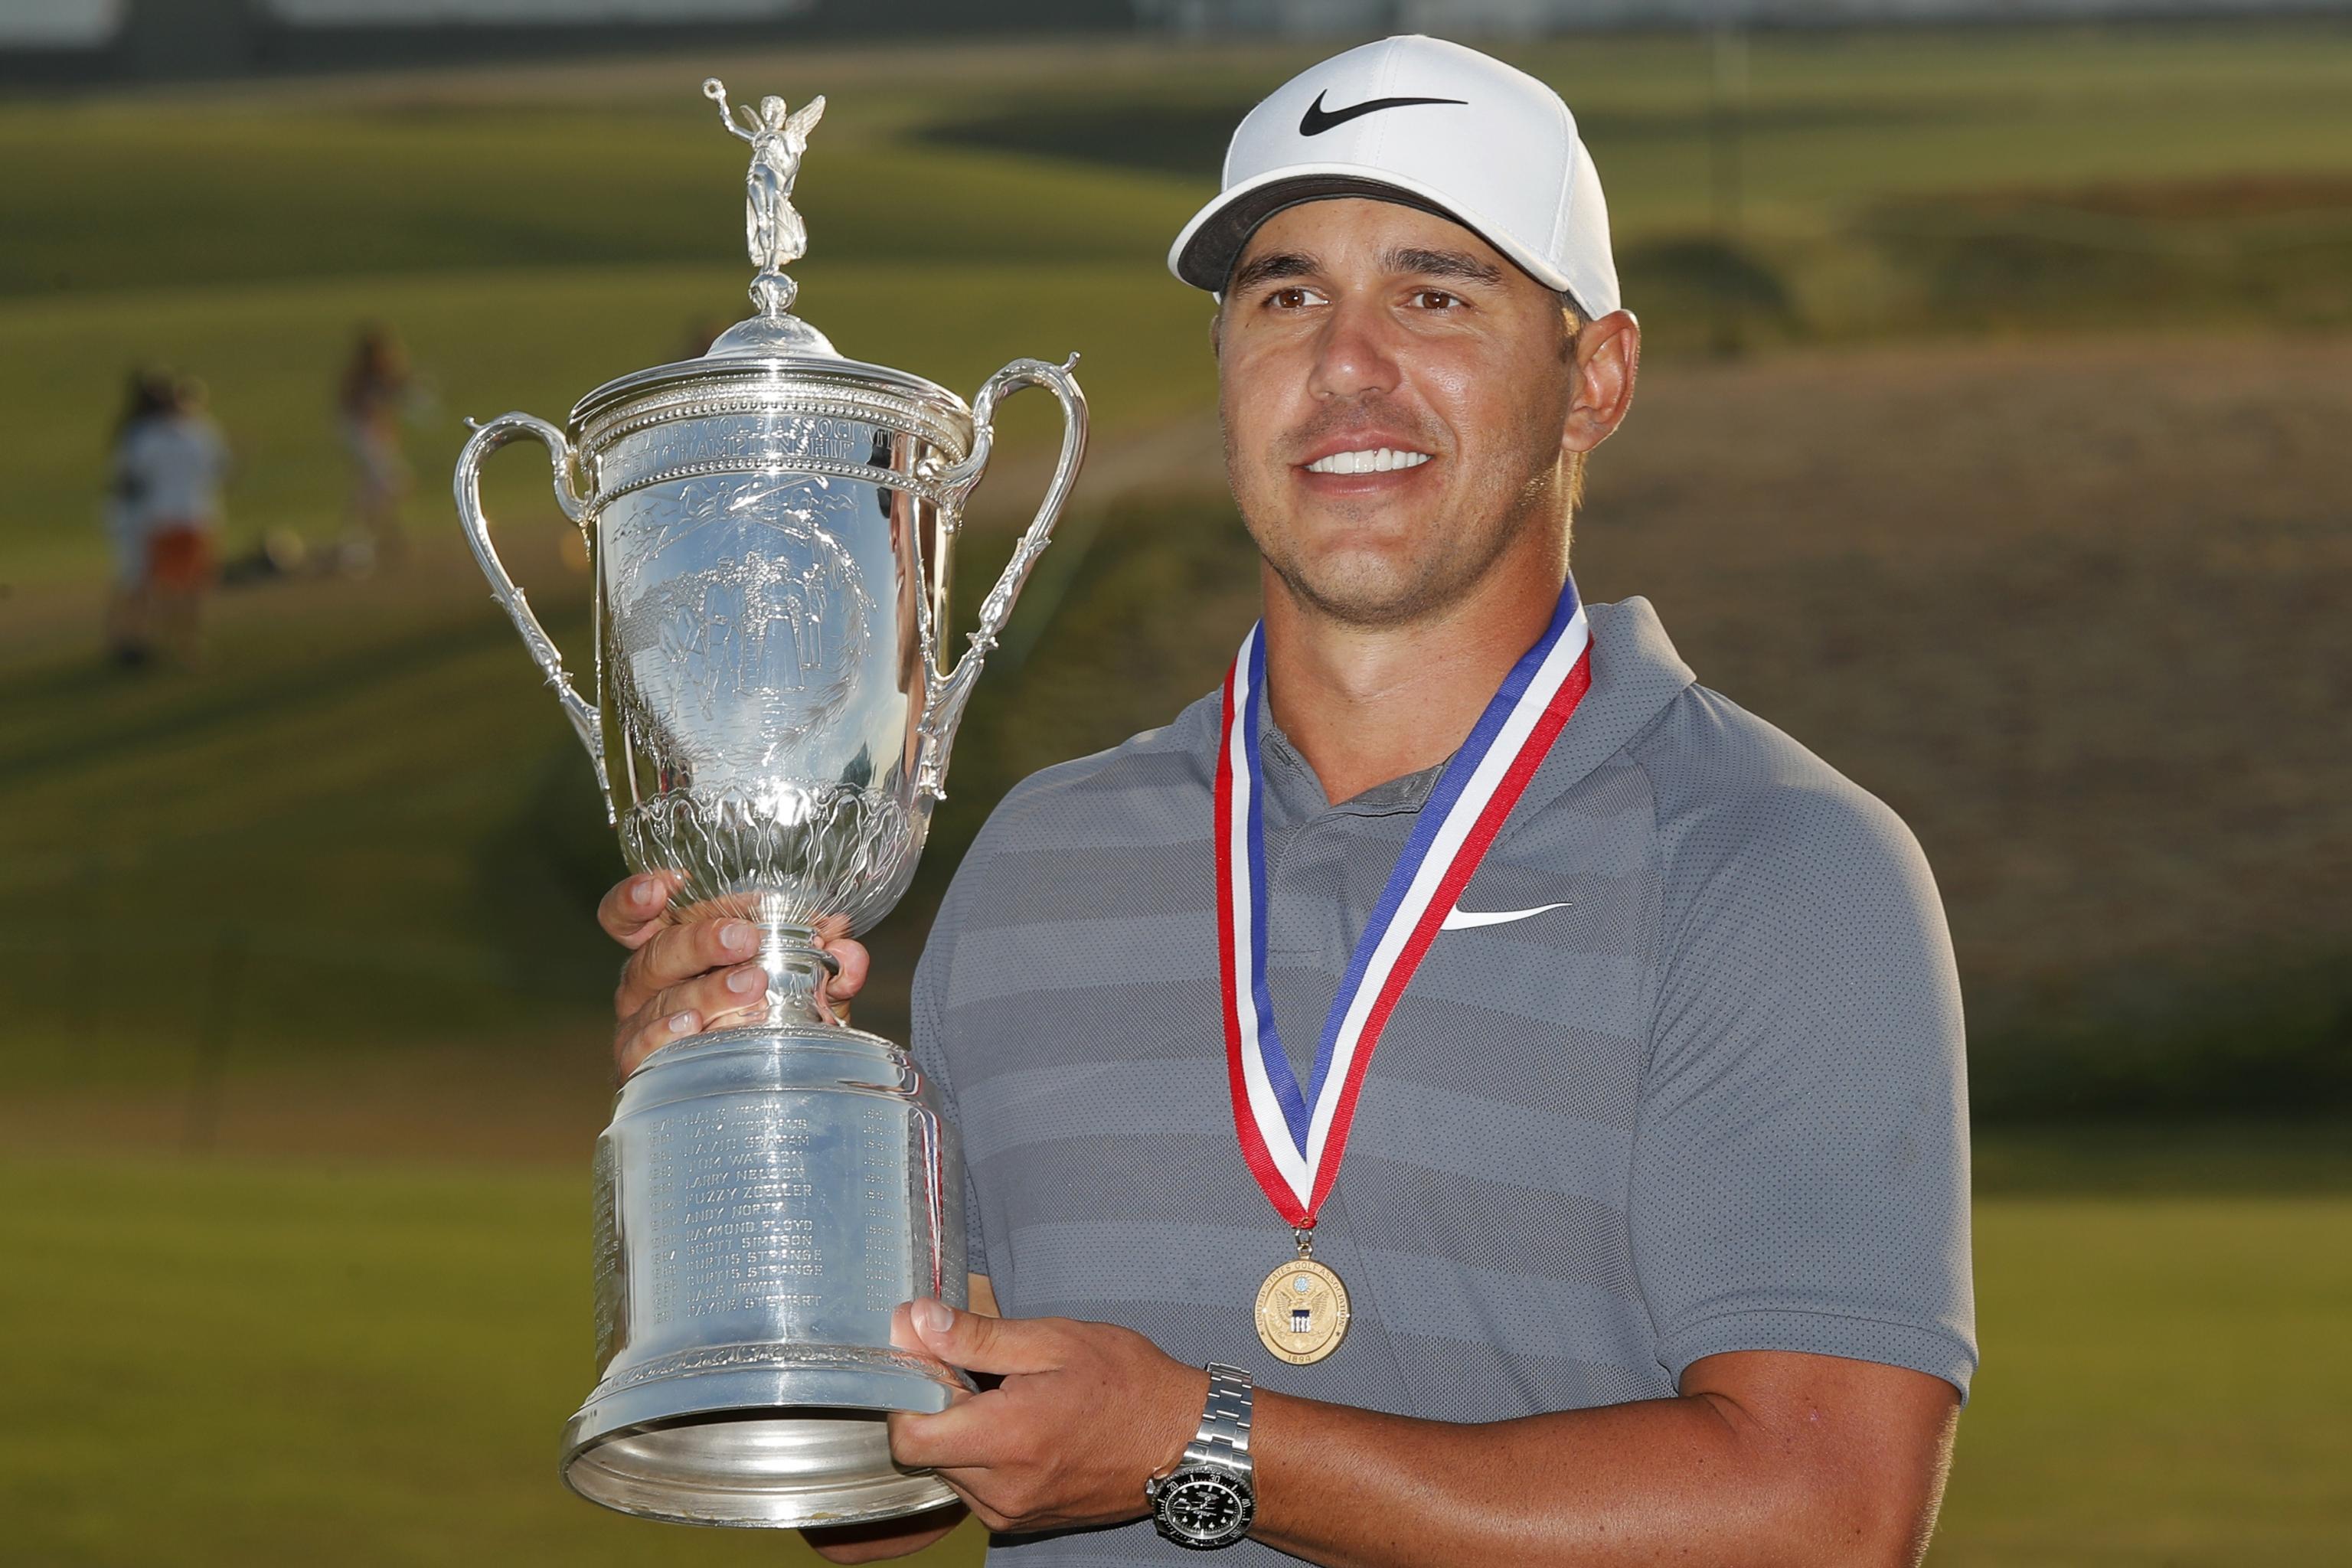 Us Open Golf Purse 2018 Prize Money Payout For Top Players On Final Leaderboard Bleacher Report Latest News Videos And Highlights